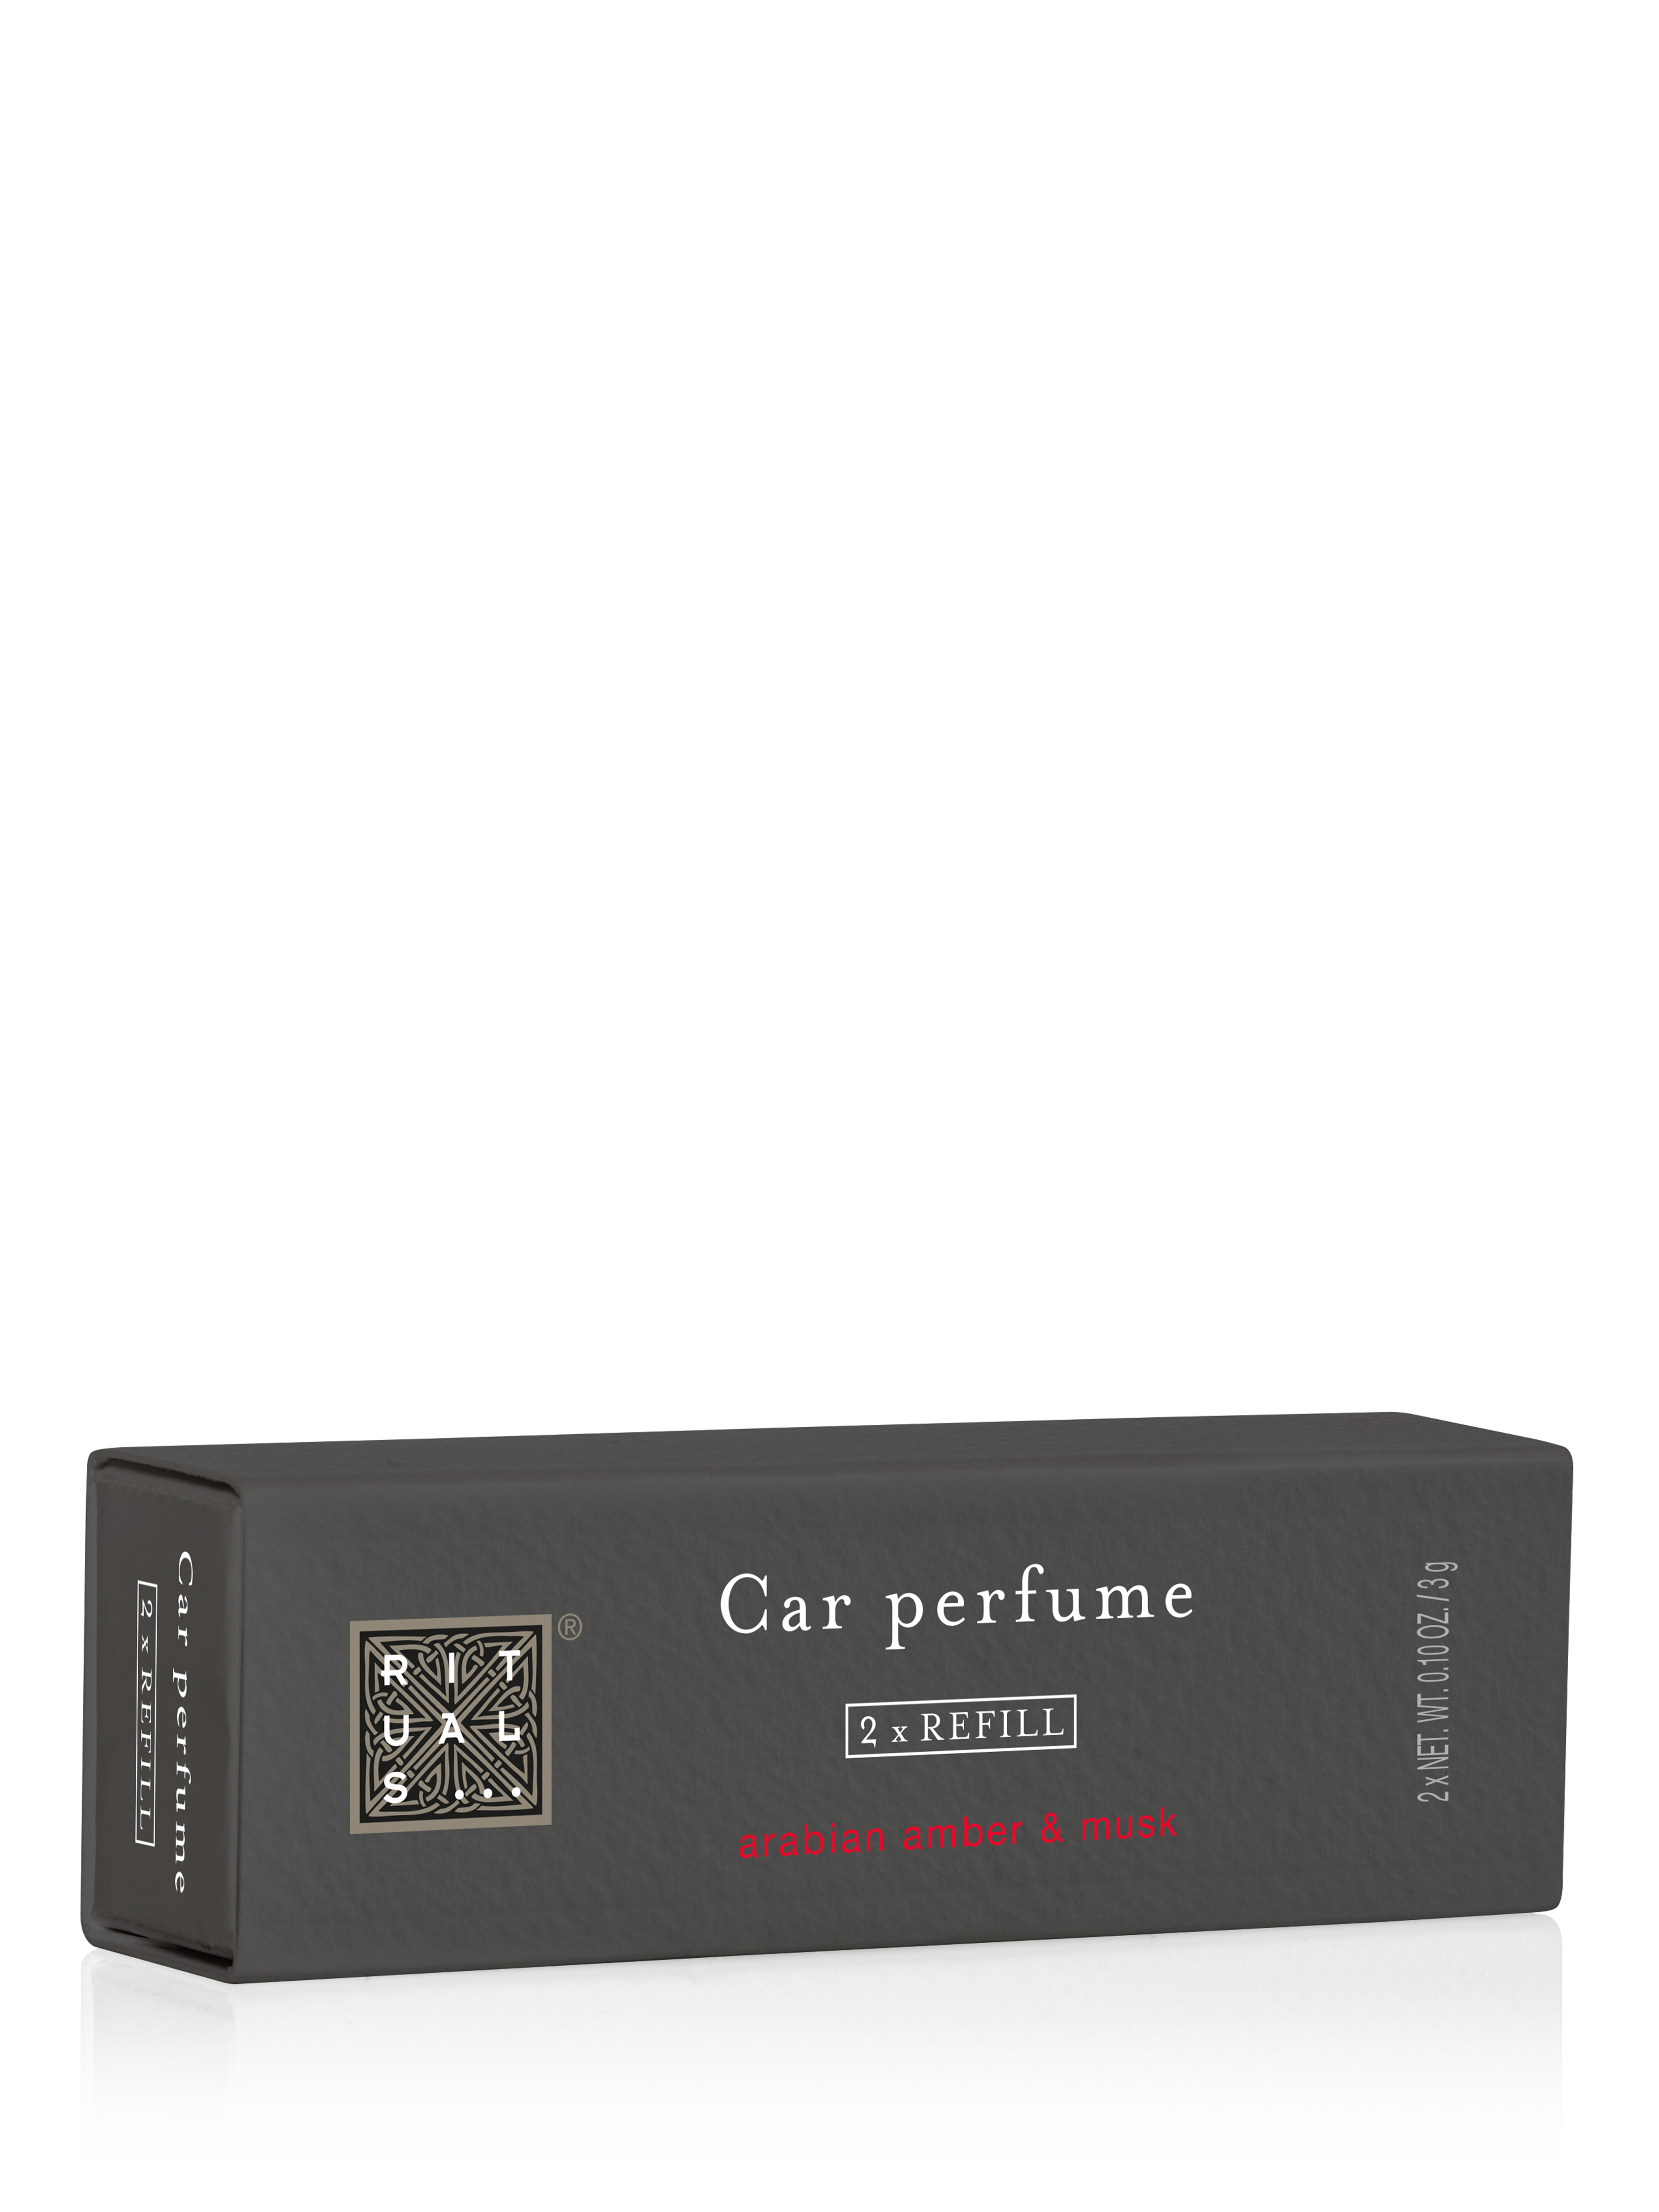 Rituals Homme Home Fragrance Life is a Journey Refill Car Perfume 6 g